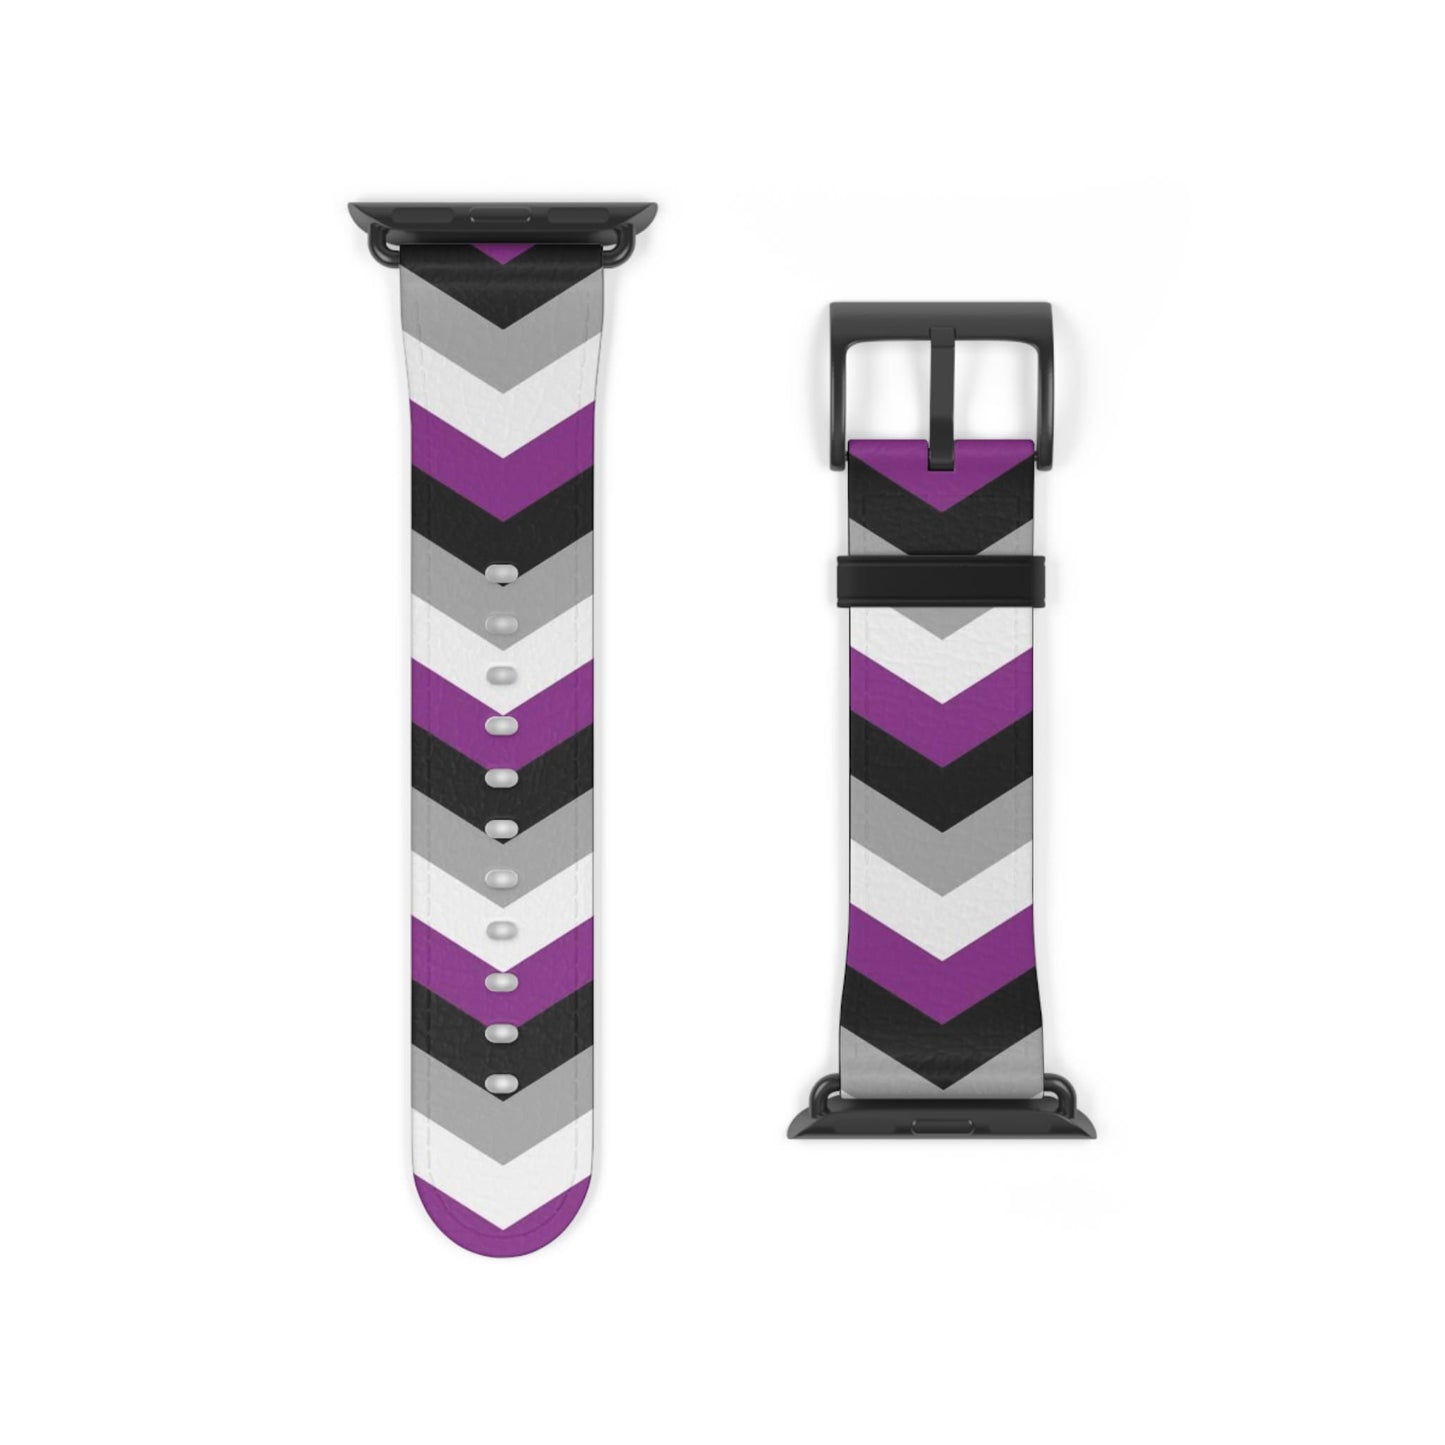 asexual apple watch band, discreet chevron pattern